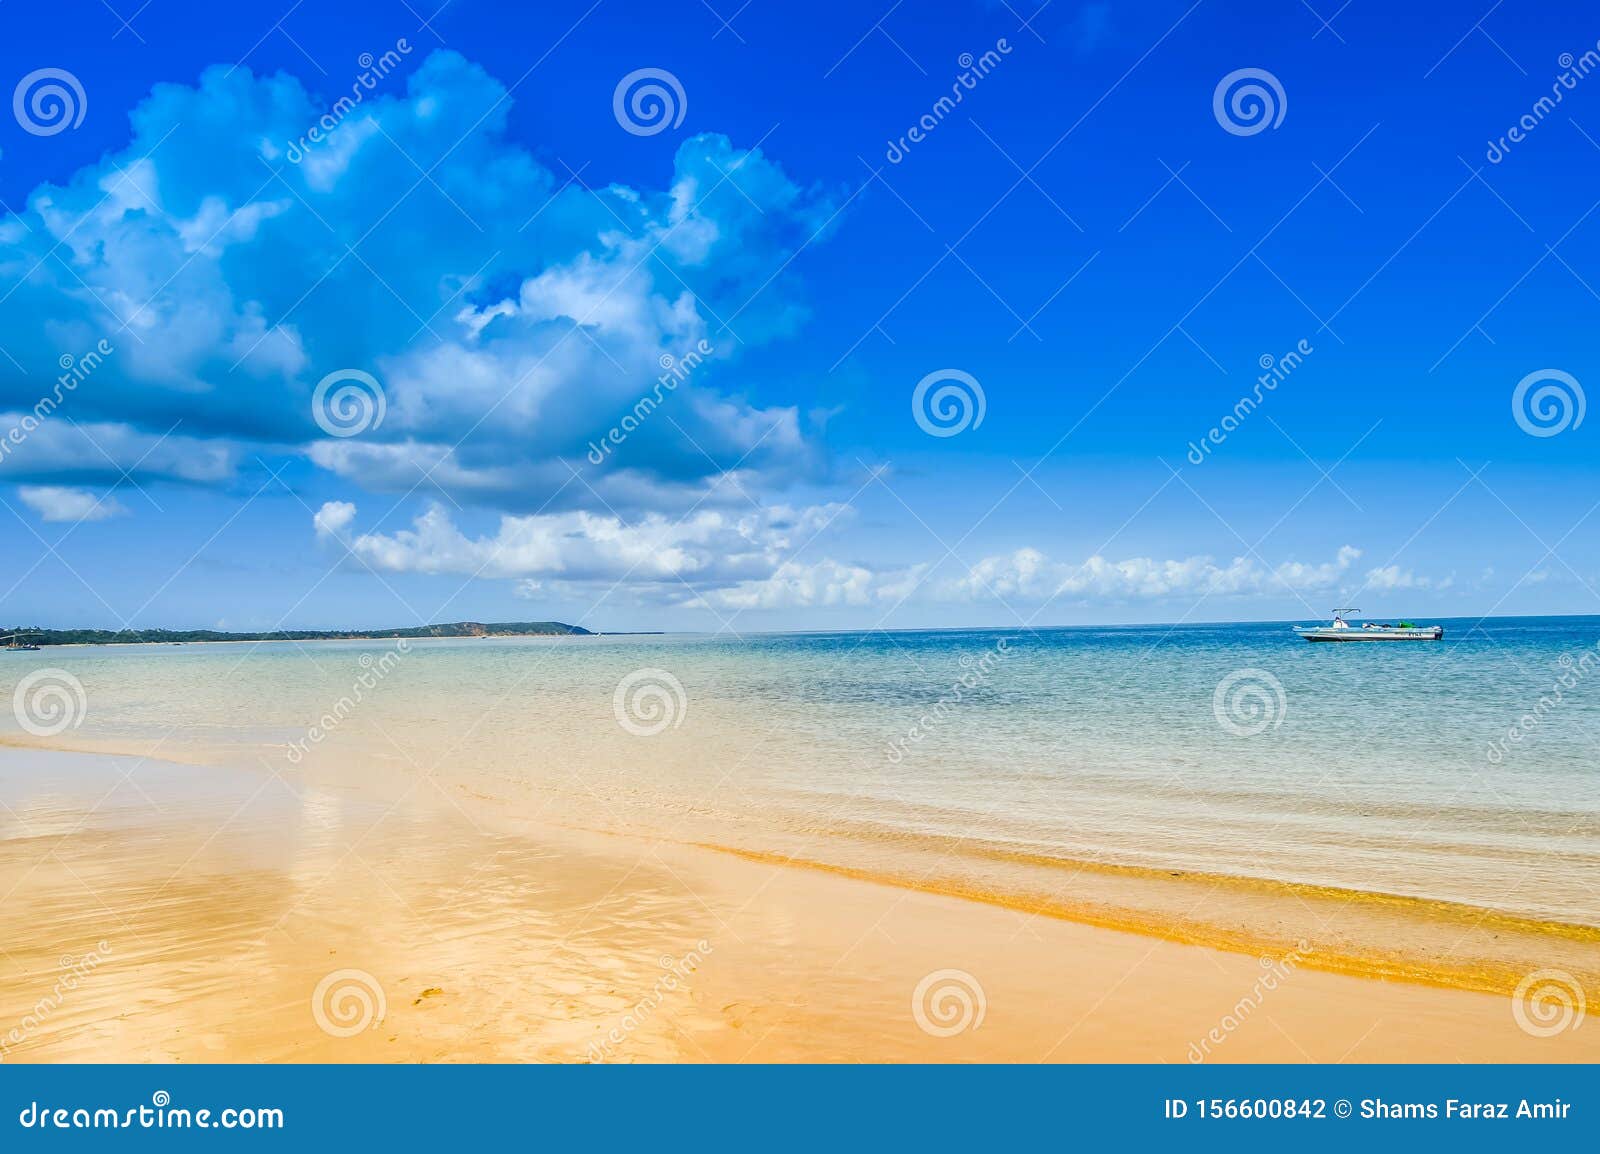 portuguese island beach with turqoise water , mozambique